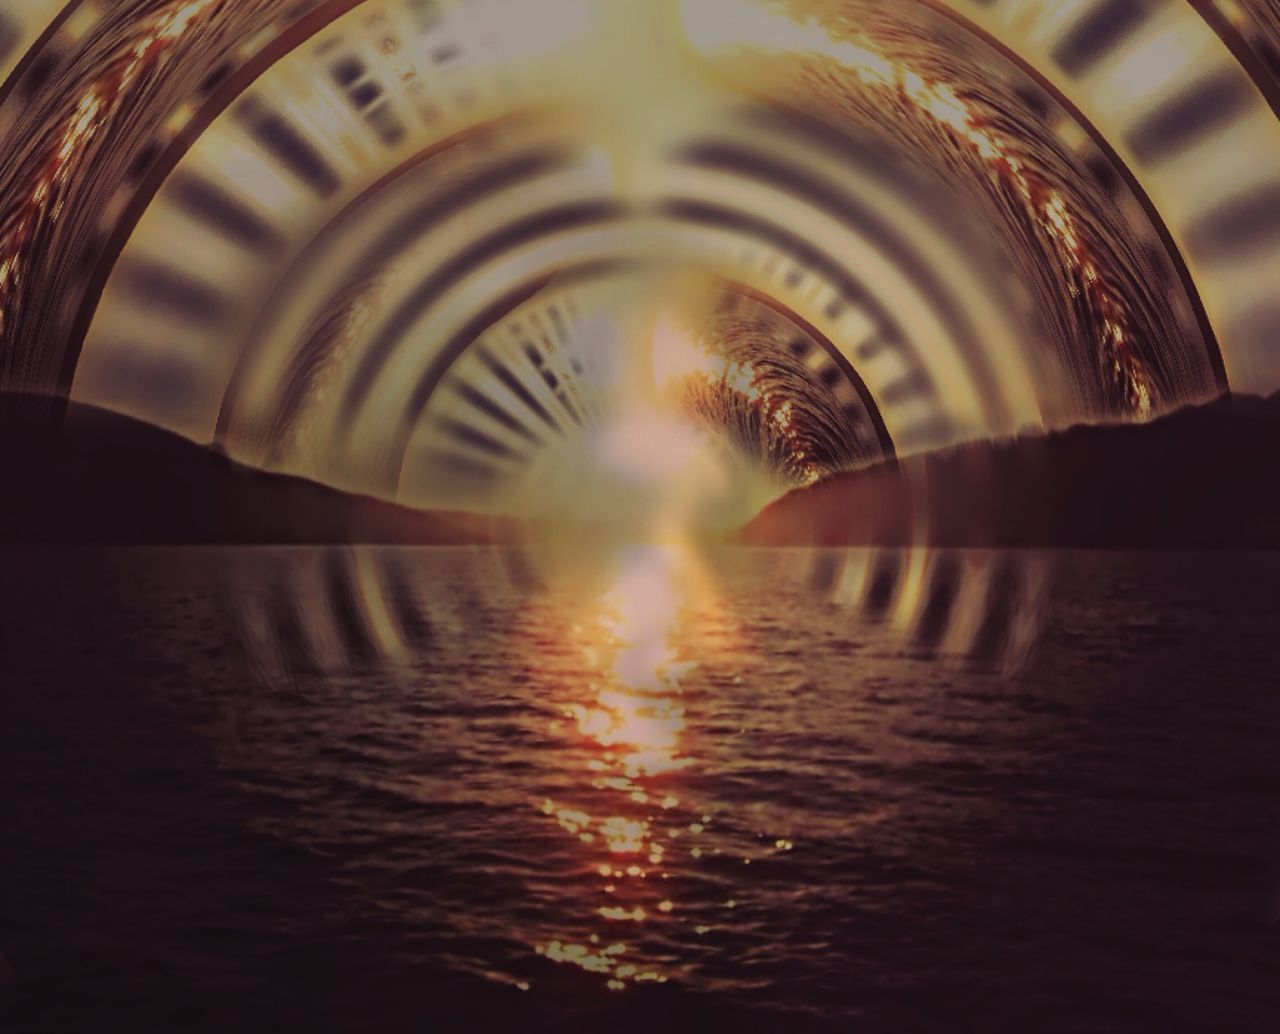 reflection, water, built structure, architecture, motion, arch, indoors, blurred motion, illuminated, waterfront, lens flare, connection, sunlight, tunnel, long exposure, transportation, no people, bridge - man made structure, diminishing perspective, sunset